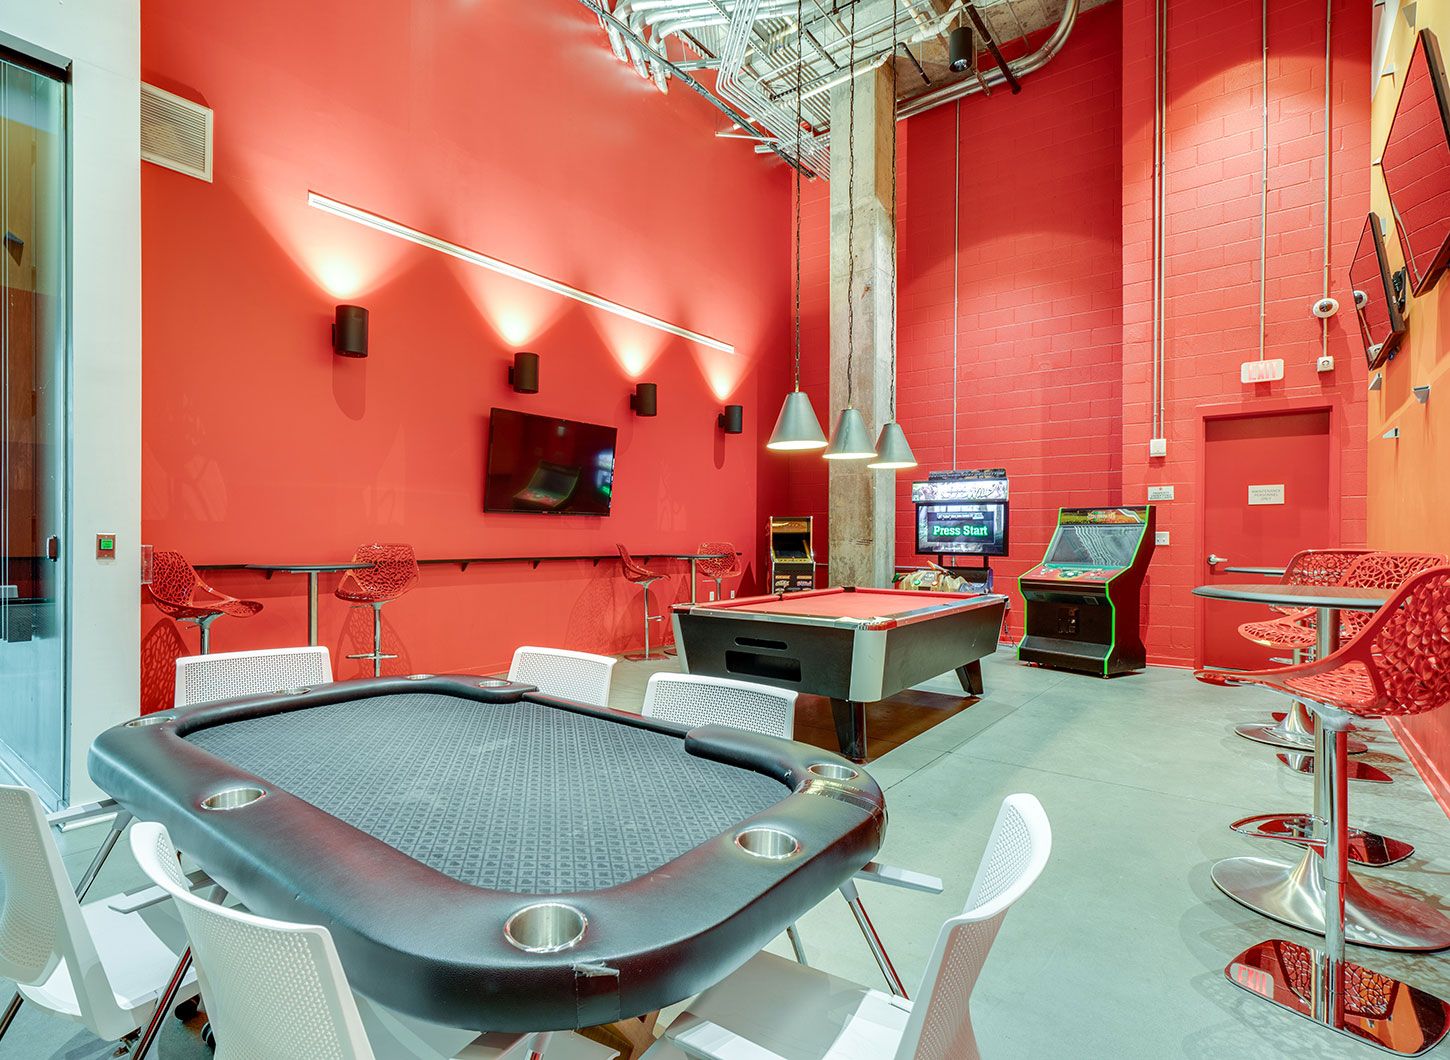 Stanhope Apartments game room